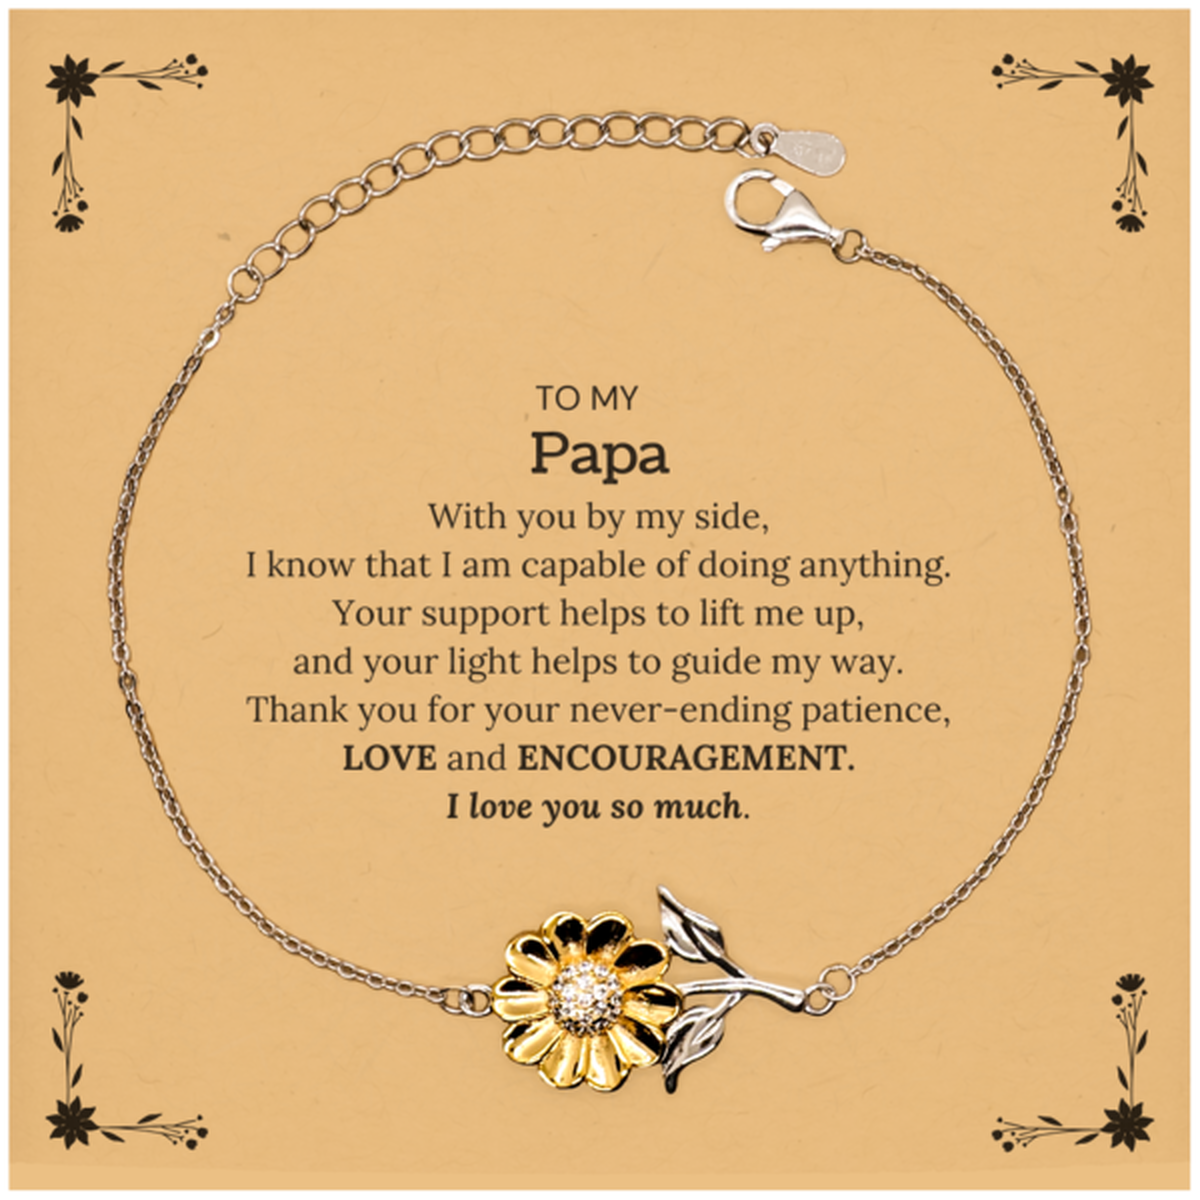 Appreciation Papa Sunflower Bracelet Gifts, To My Papa Birthday Christmas Wedding Keepsake Gifts for Papa With you by my side, I know that I am capable of doing anything. I love you so much